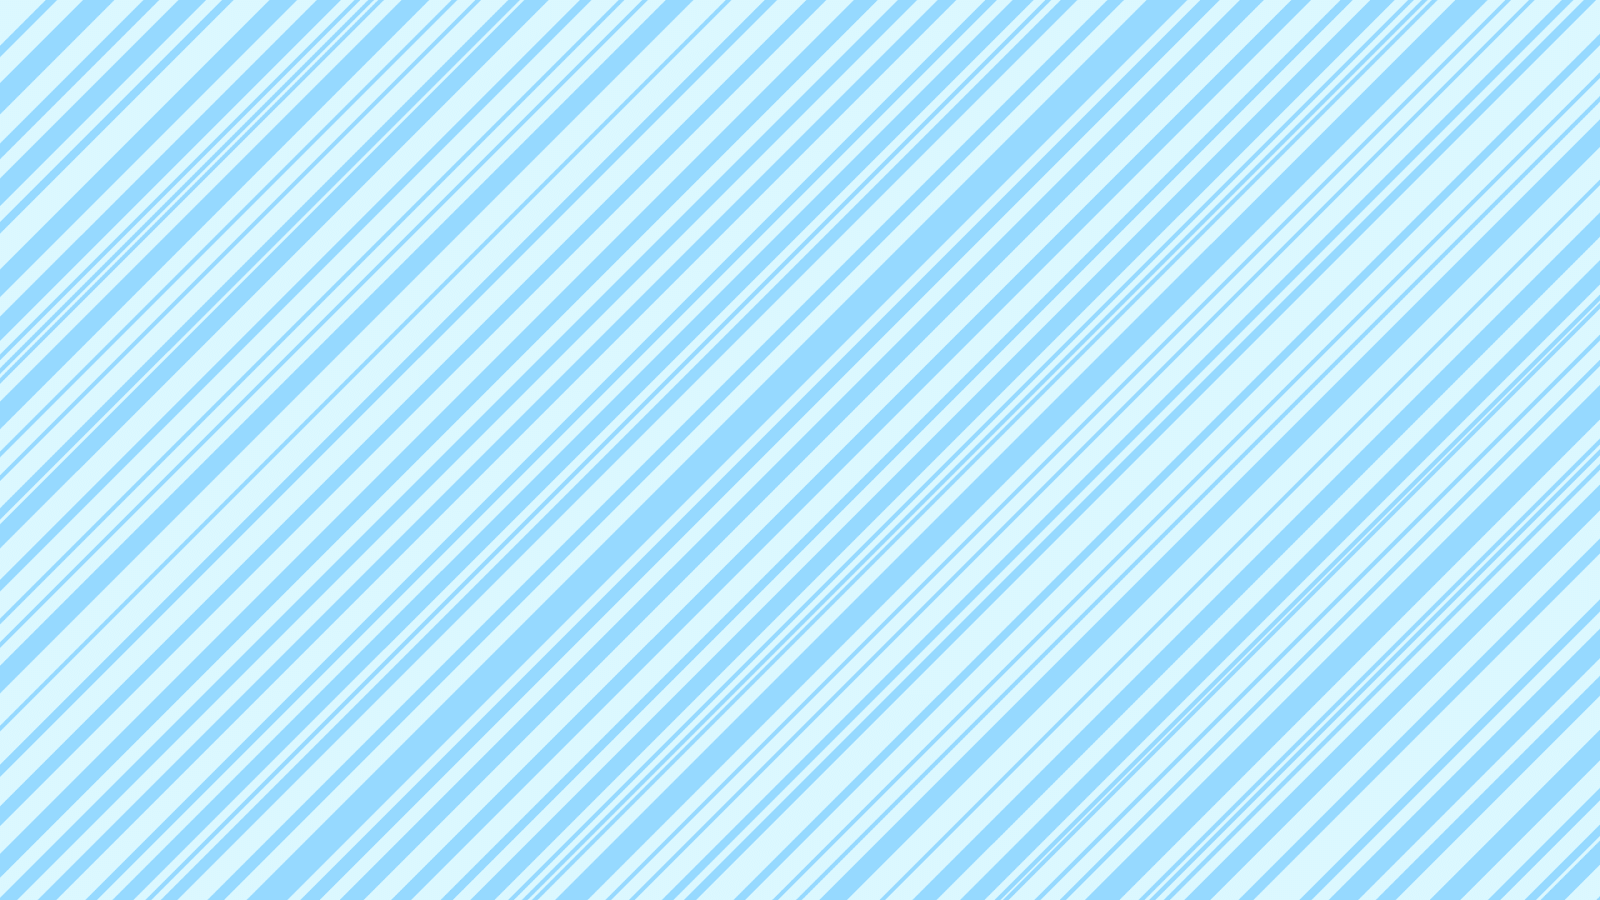 Background material with various effect lines drawn (colored)